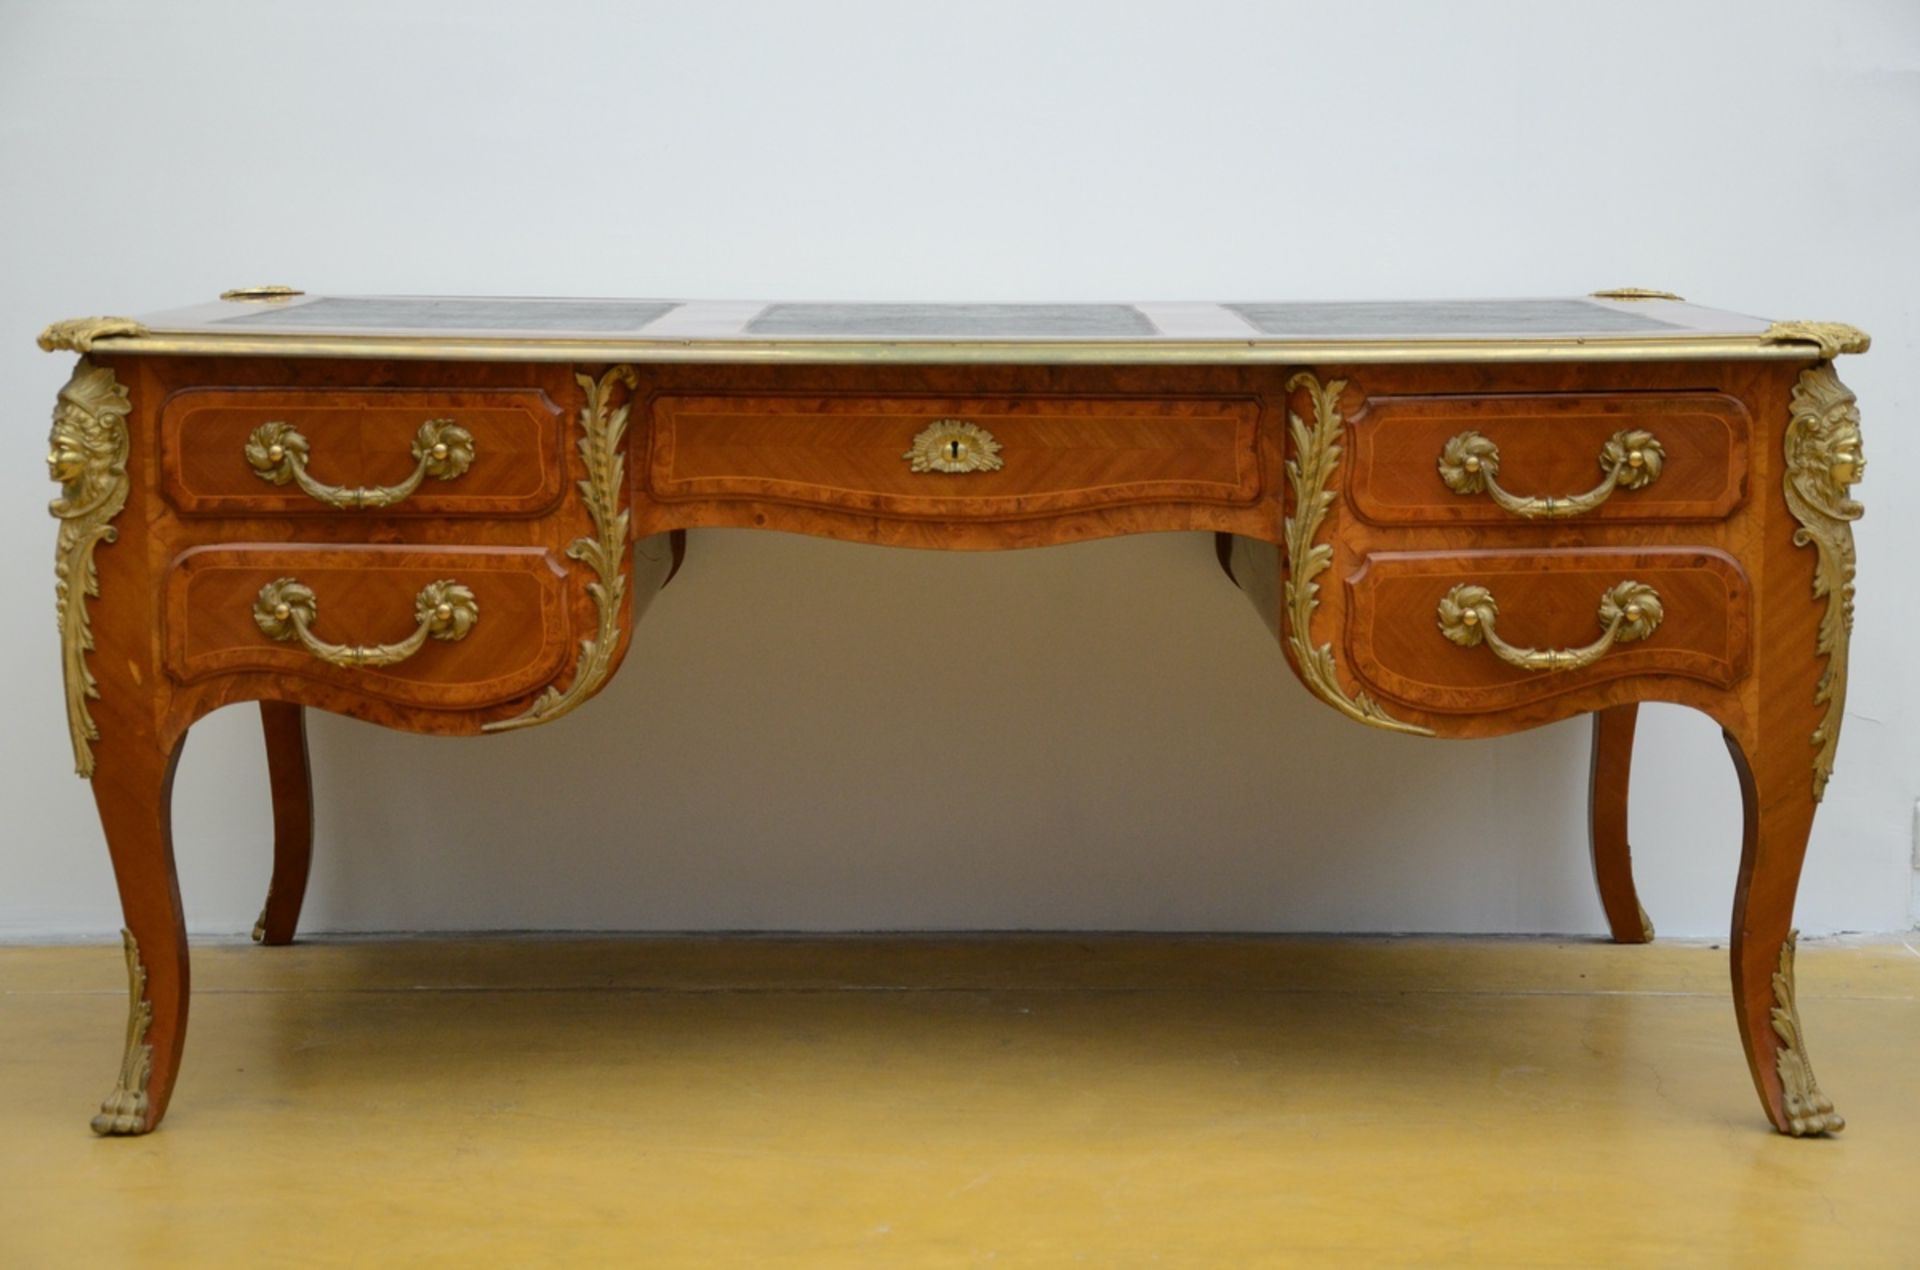 Large desk in Louis XV style (79x177x110cm) - Image 3 of 4